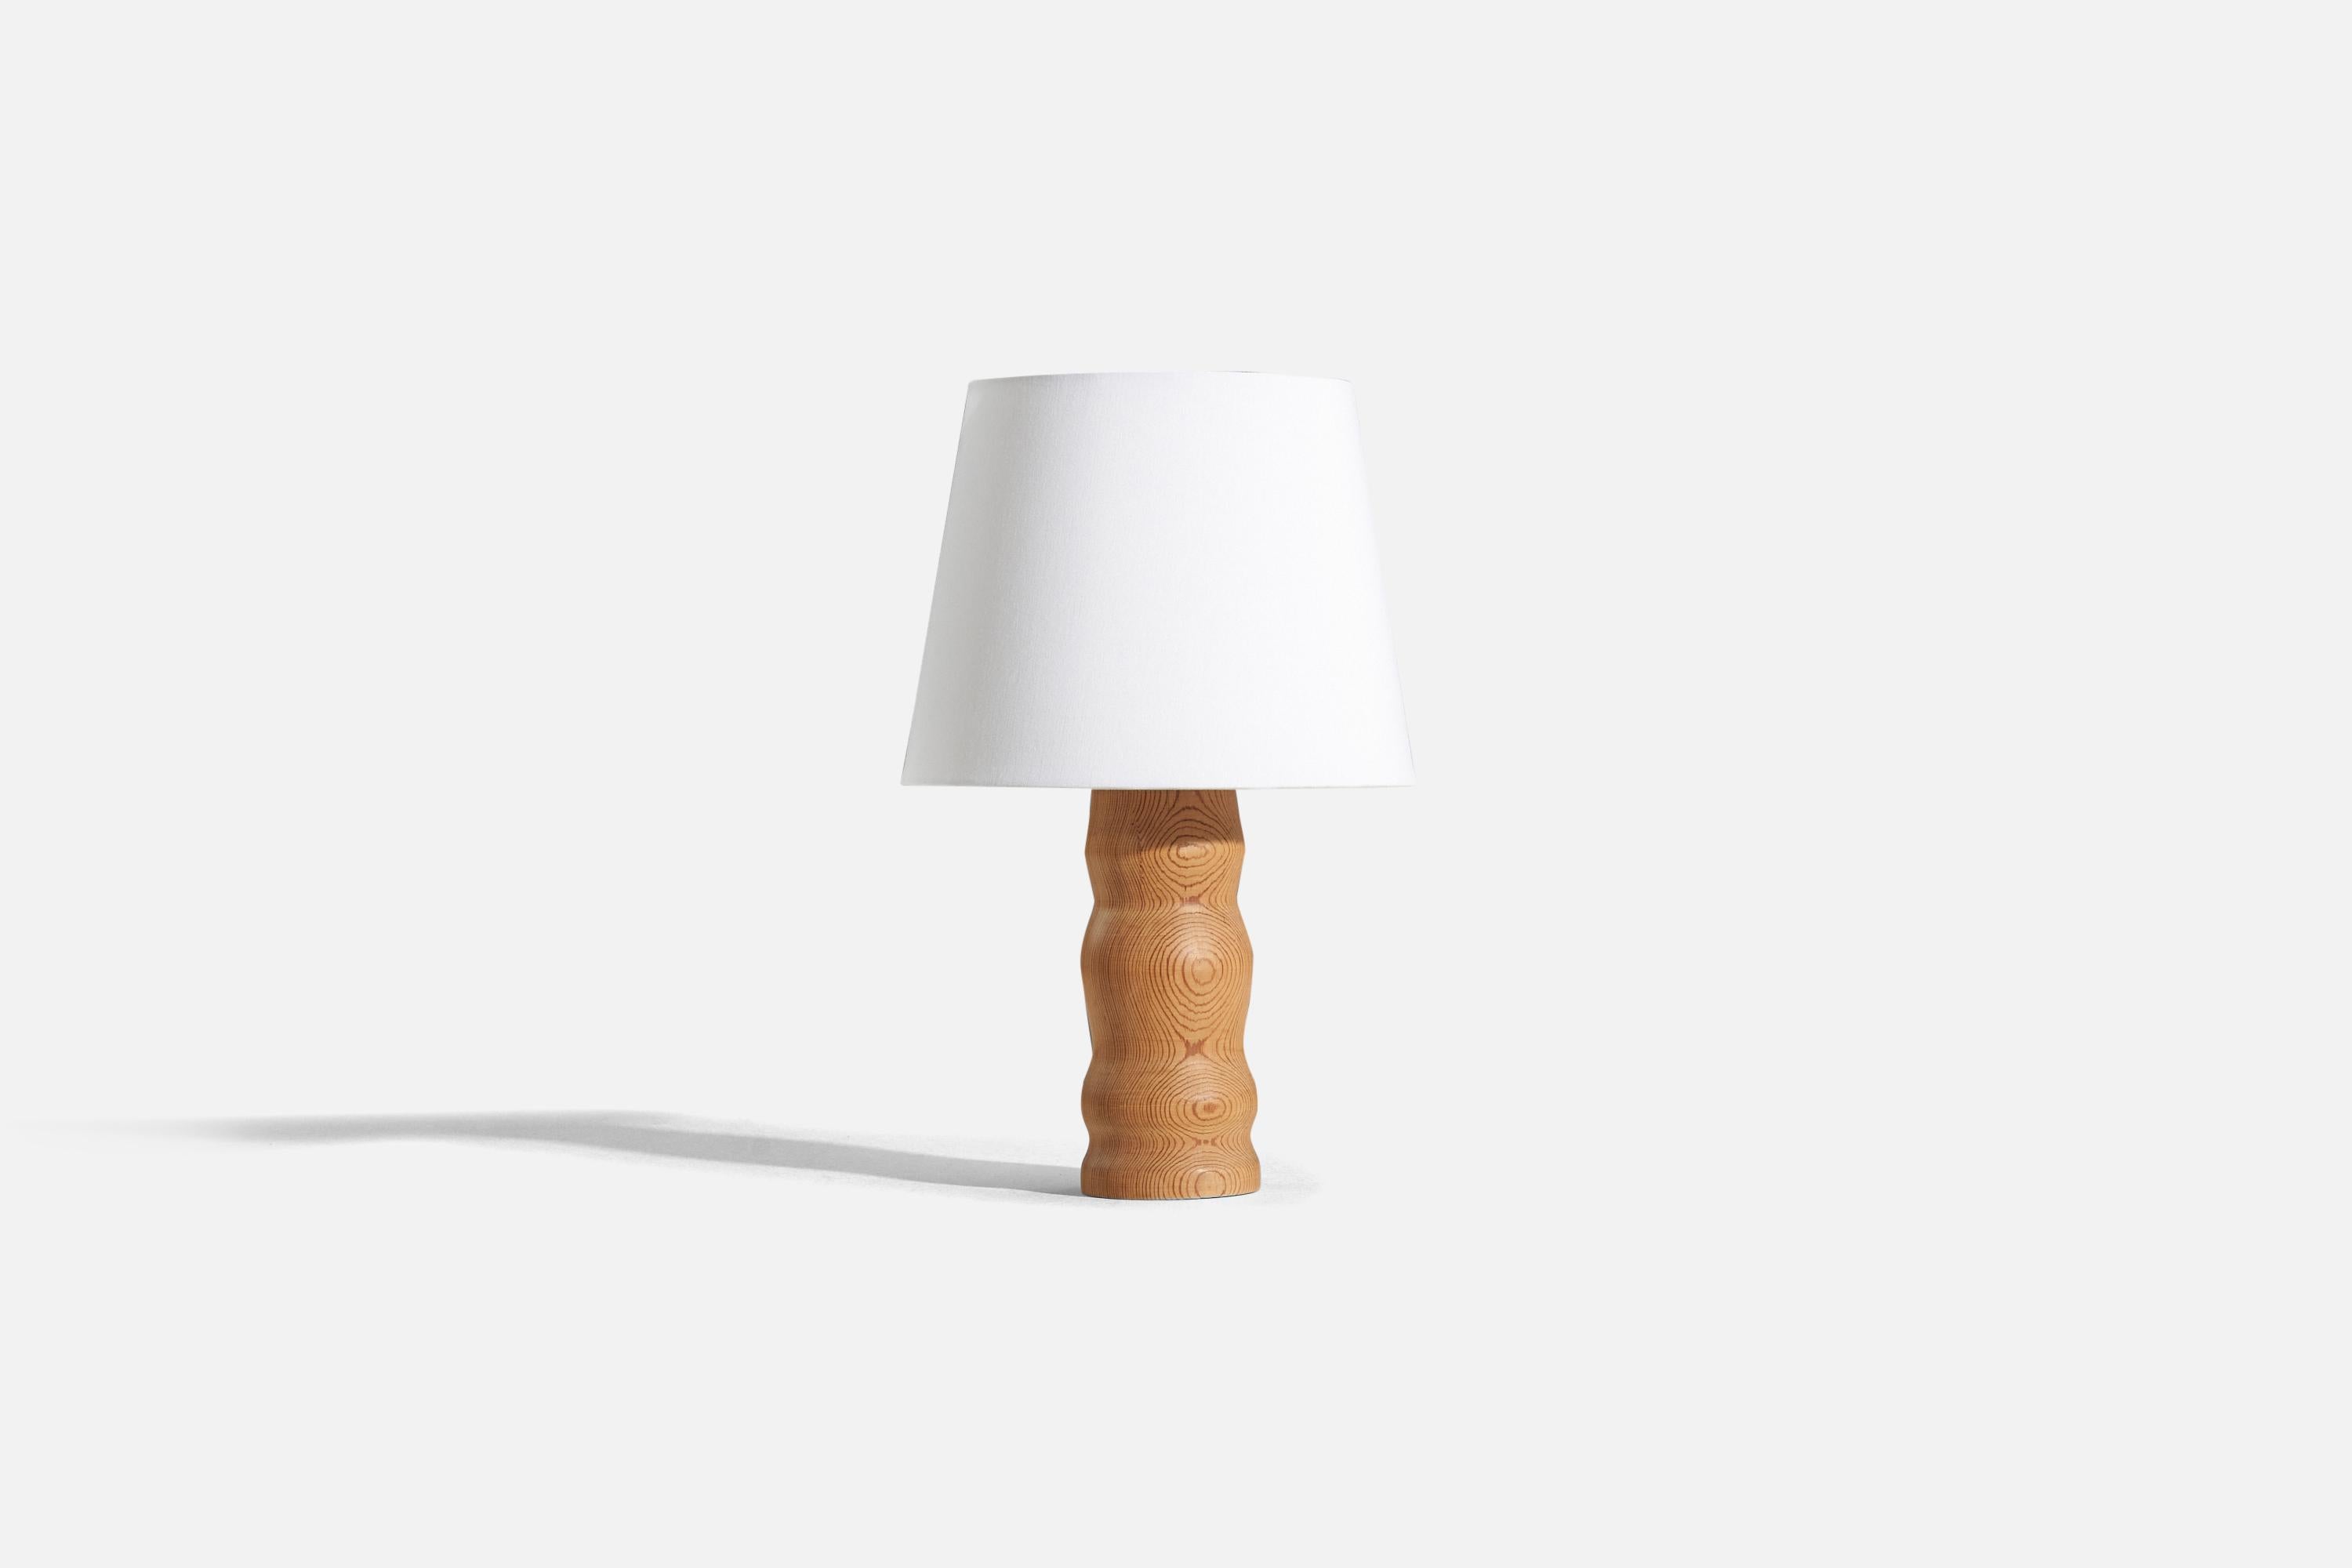 A pine table lamp designed and produced in Sweden, c. 1970s.

Sold without lampshade. 
Dimensions of Lamp (inches) : 11.875 x 3.5 x 3.5 (H x W x D)
Dimensions of Shade (inches) : 7.5 x 10 x 8 (T x B x S)
Dimension of Lamp with Shade (inches) :